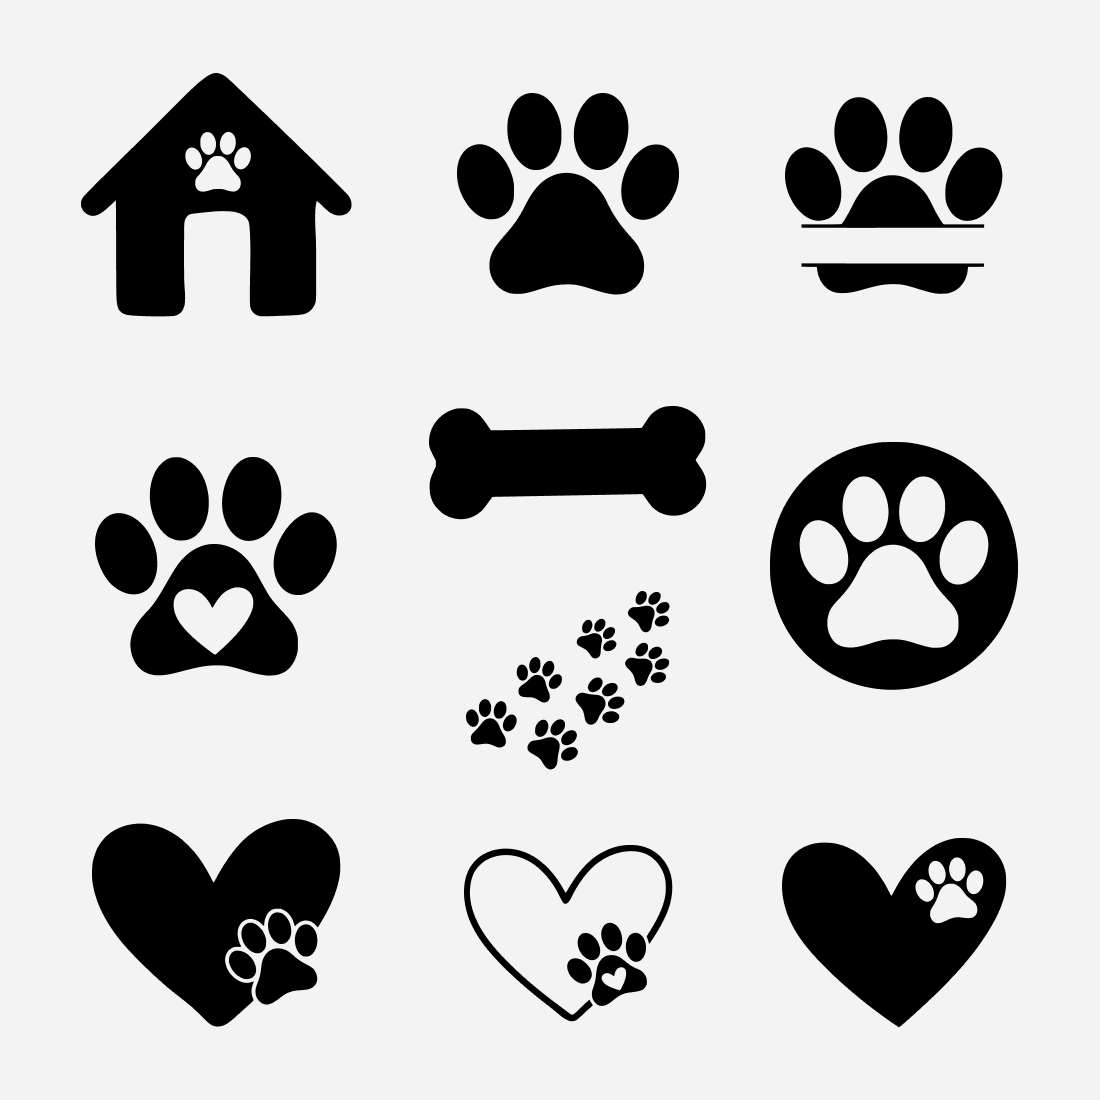 Drawings of dog paws, hearts, booths and bones in white and black.